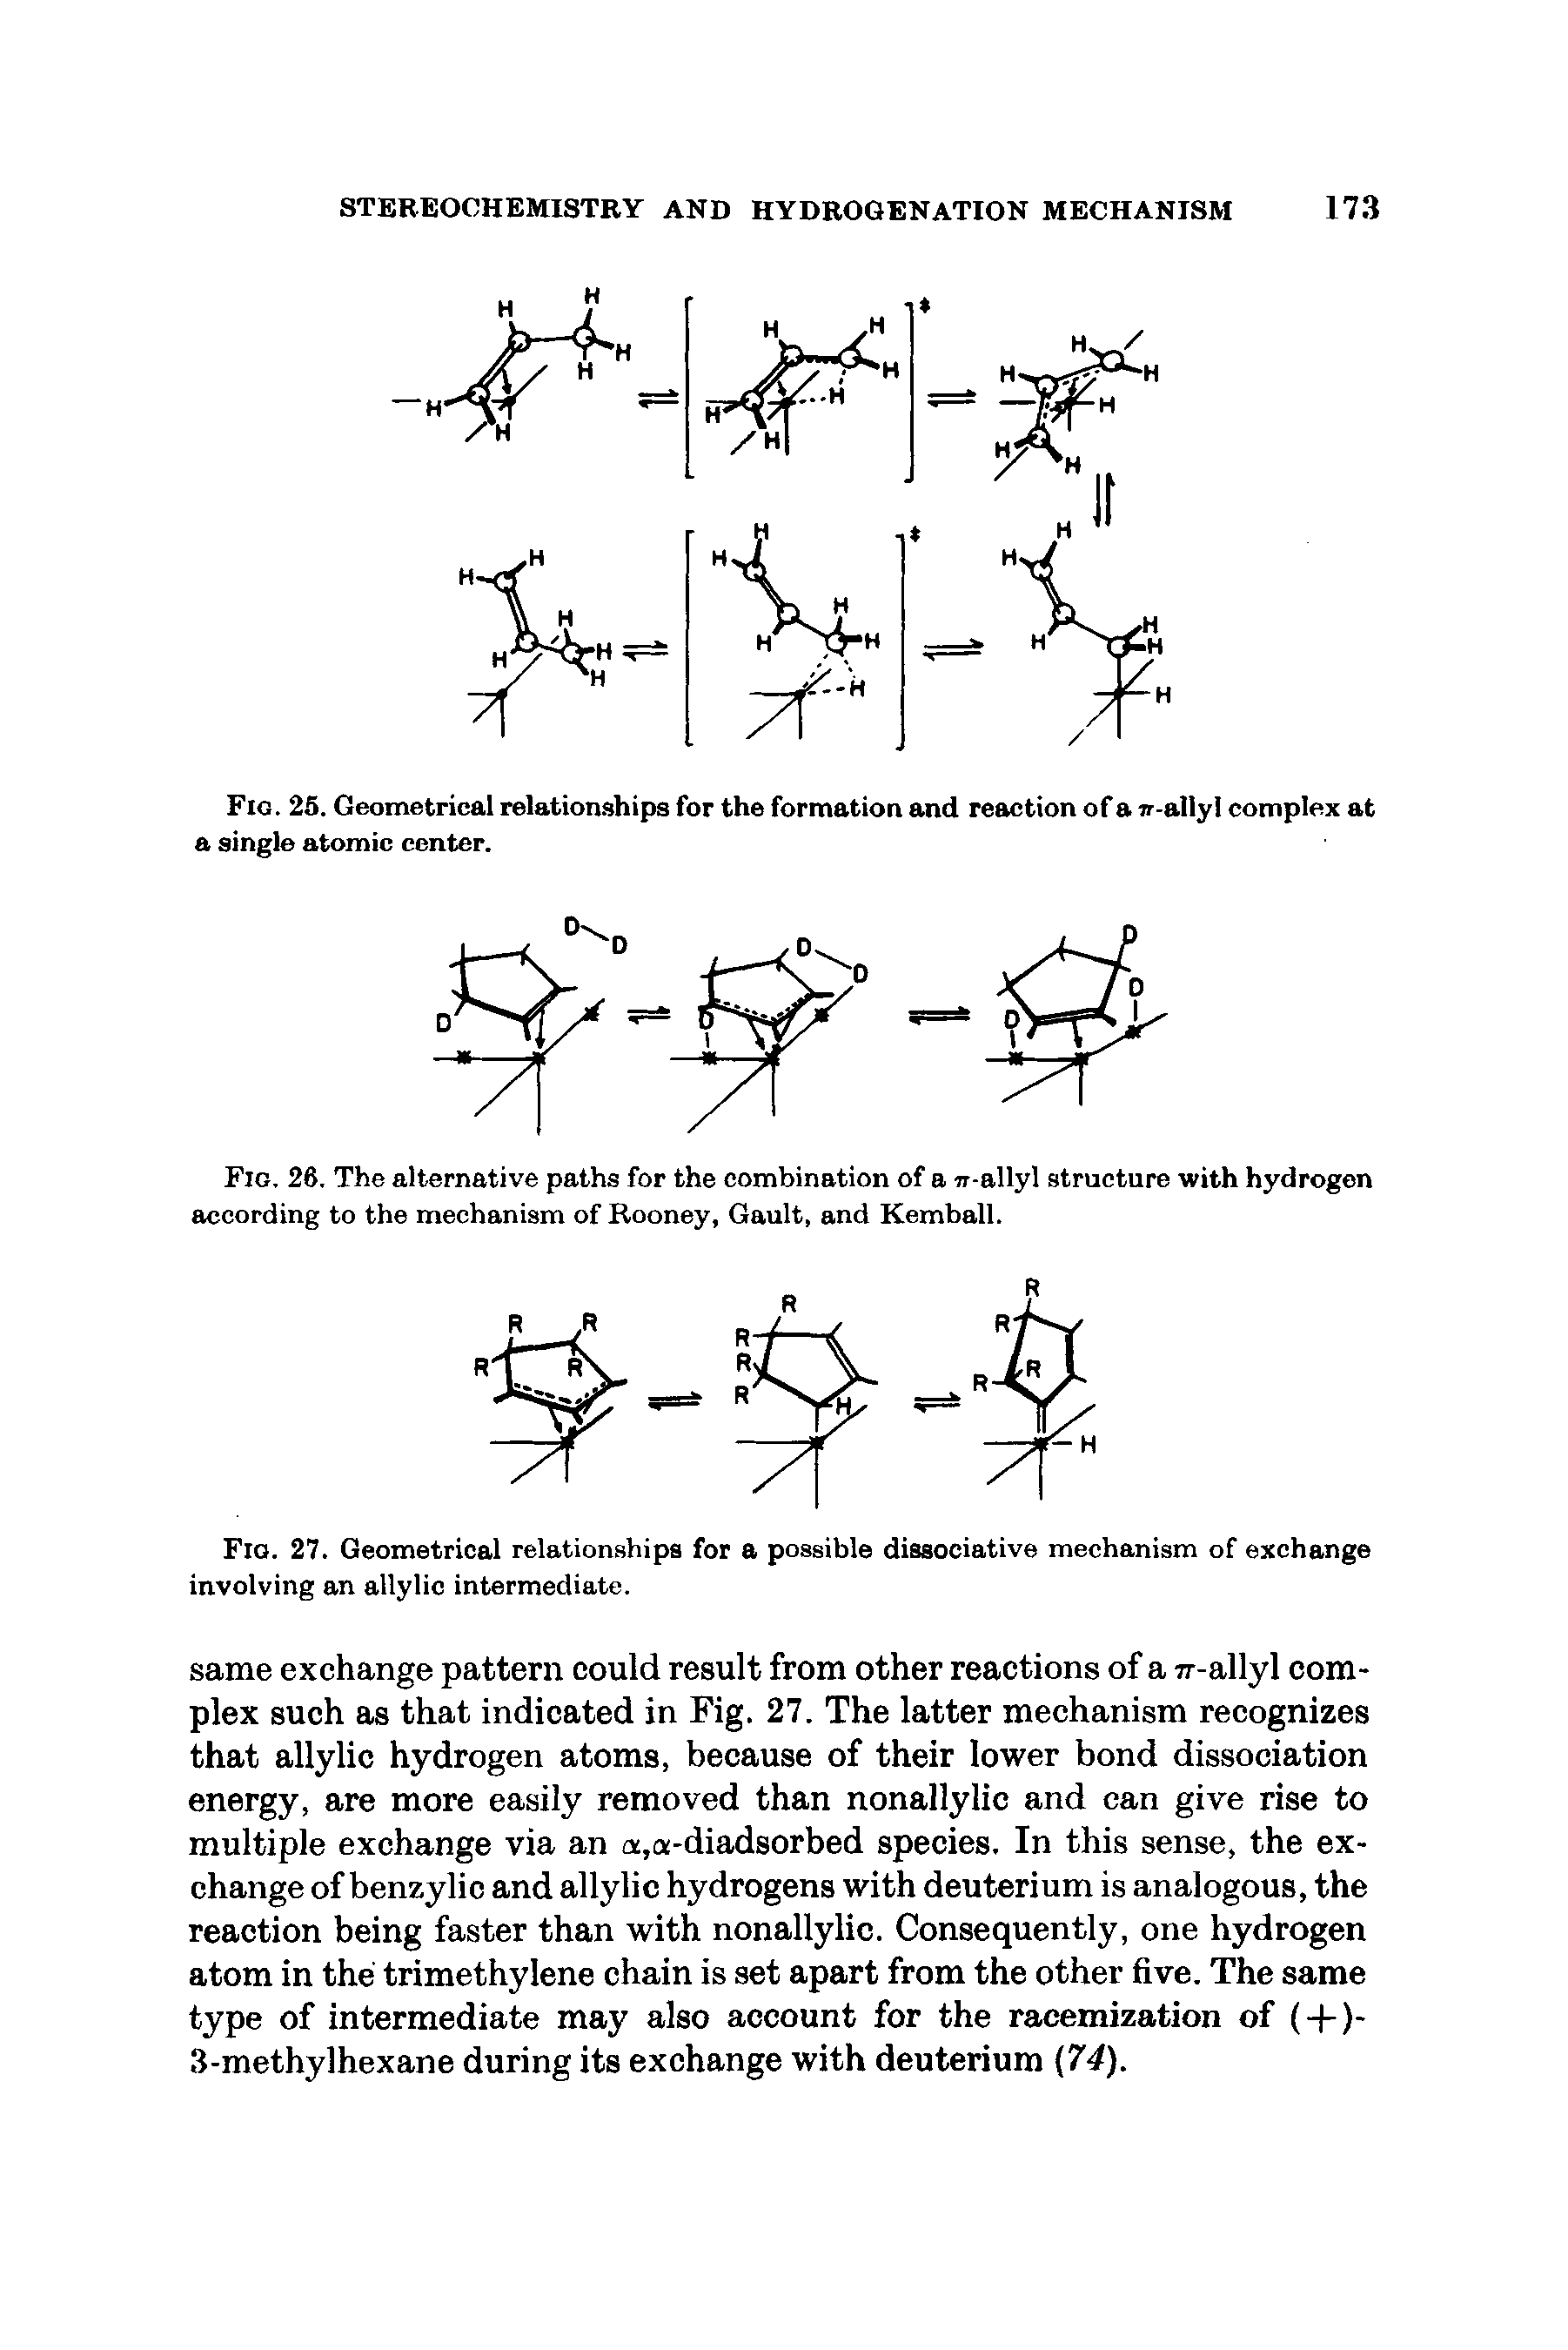 Fig. 26. The alternative paths for the combination of a w-allyl structure with hydrogen according to the mechanism of Rooney, Gault, and Kemball.